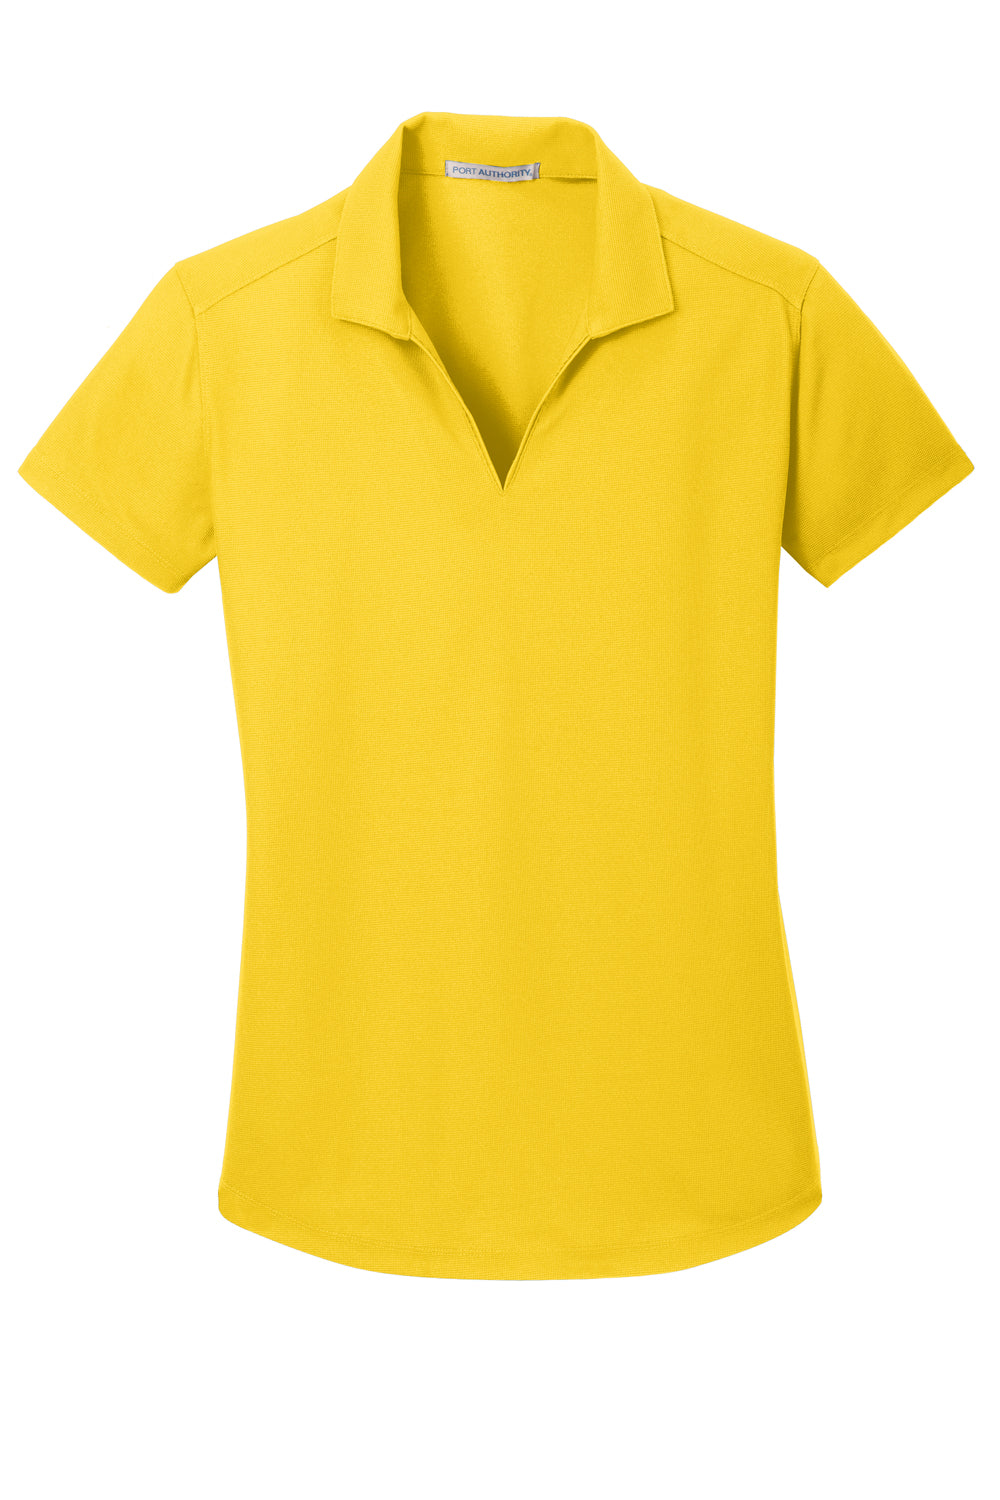 Port Authority L572 Womens Dry Zone Moisture Wicking Short Sleeve Polo Shirt Yellow Flat Front